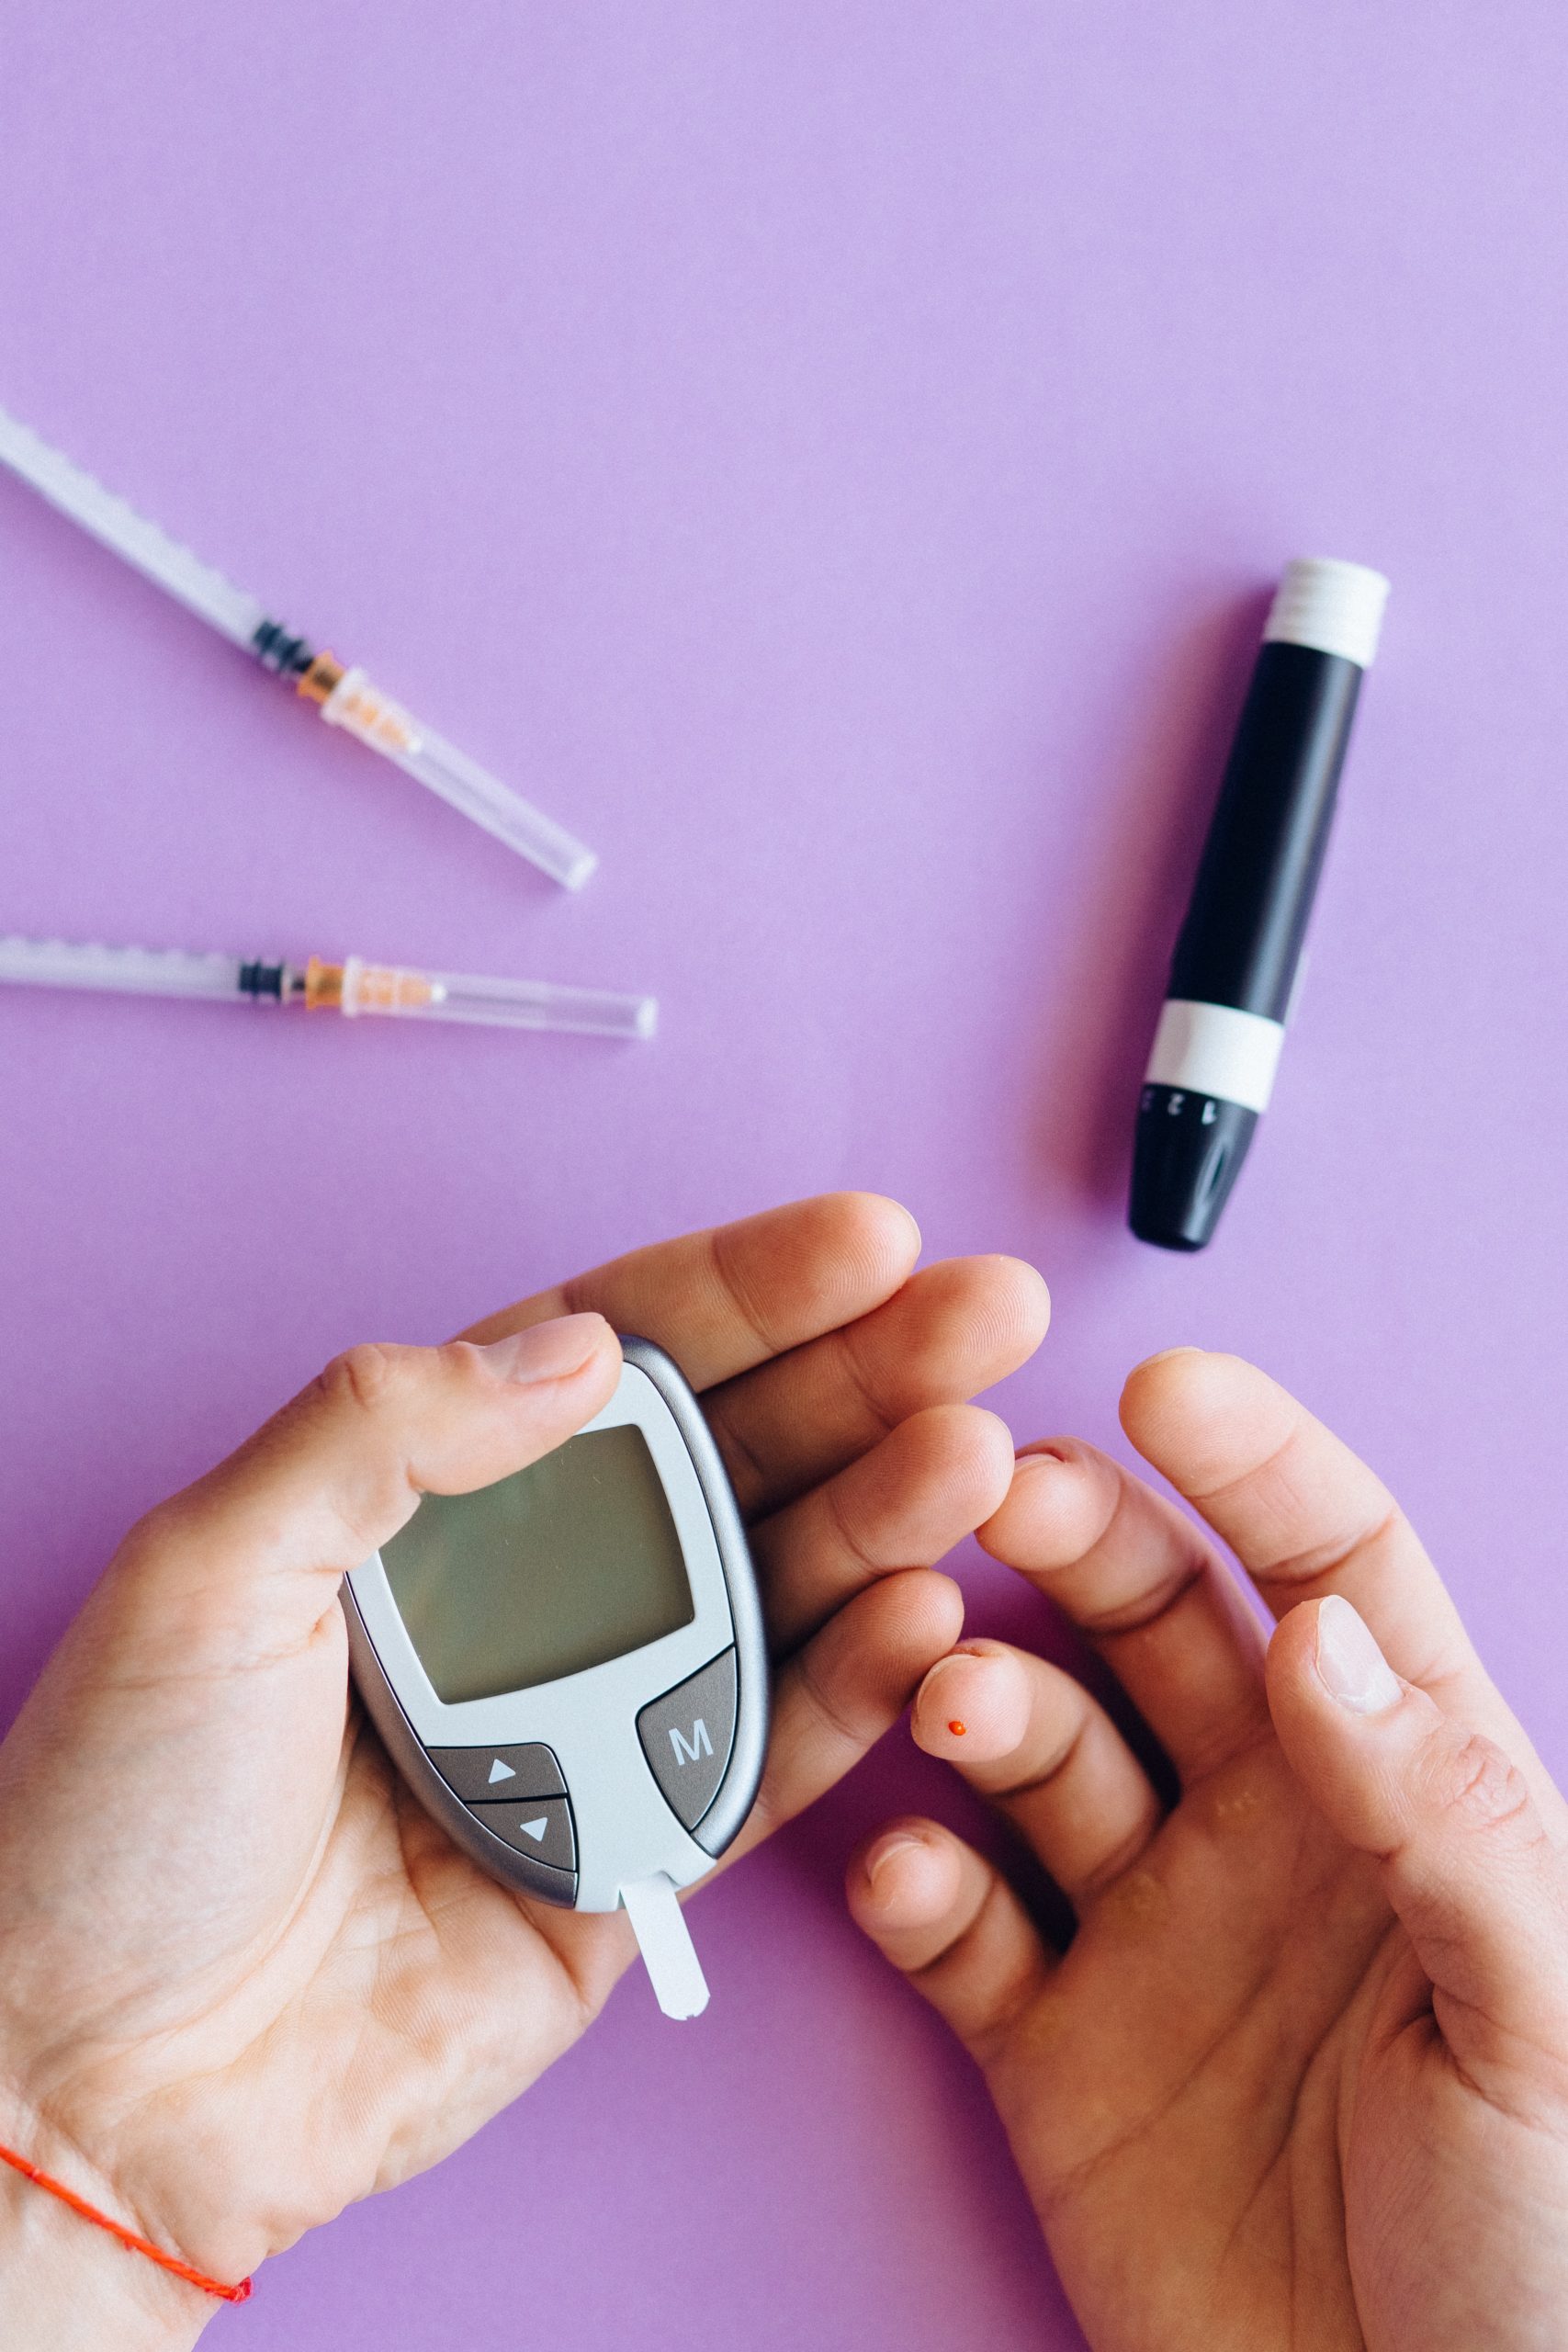 This picture depicts an individual using a glucose meter to administer insulin which typically can be covered by certain Medicare Advantage Special Needs Plans